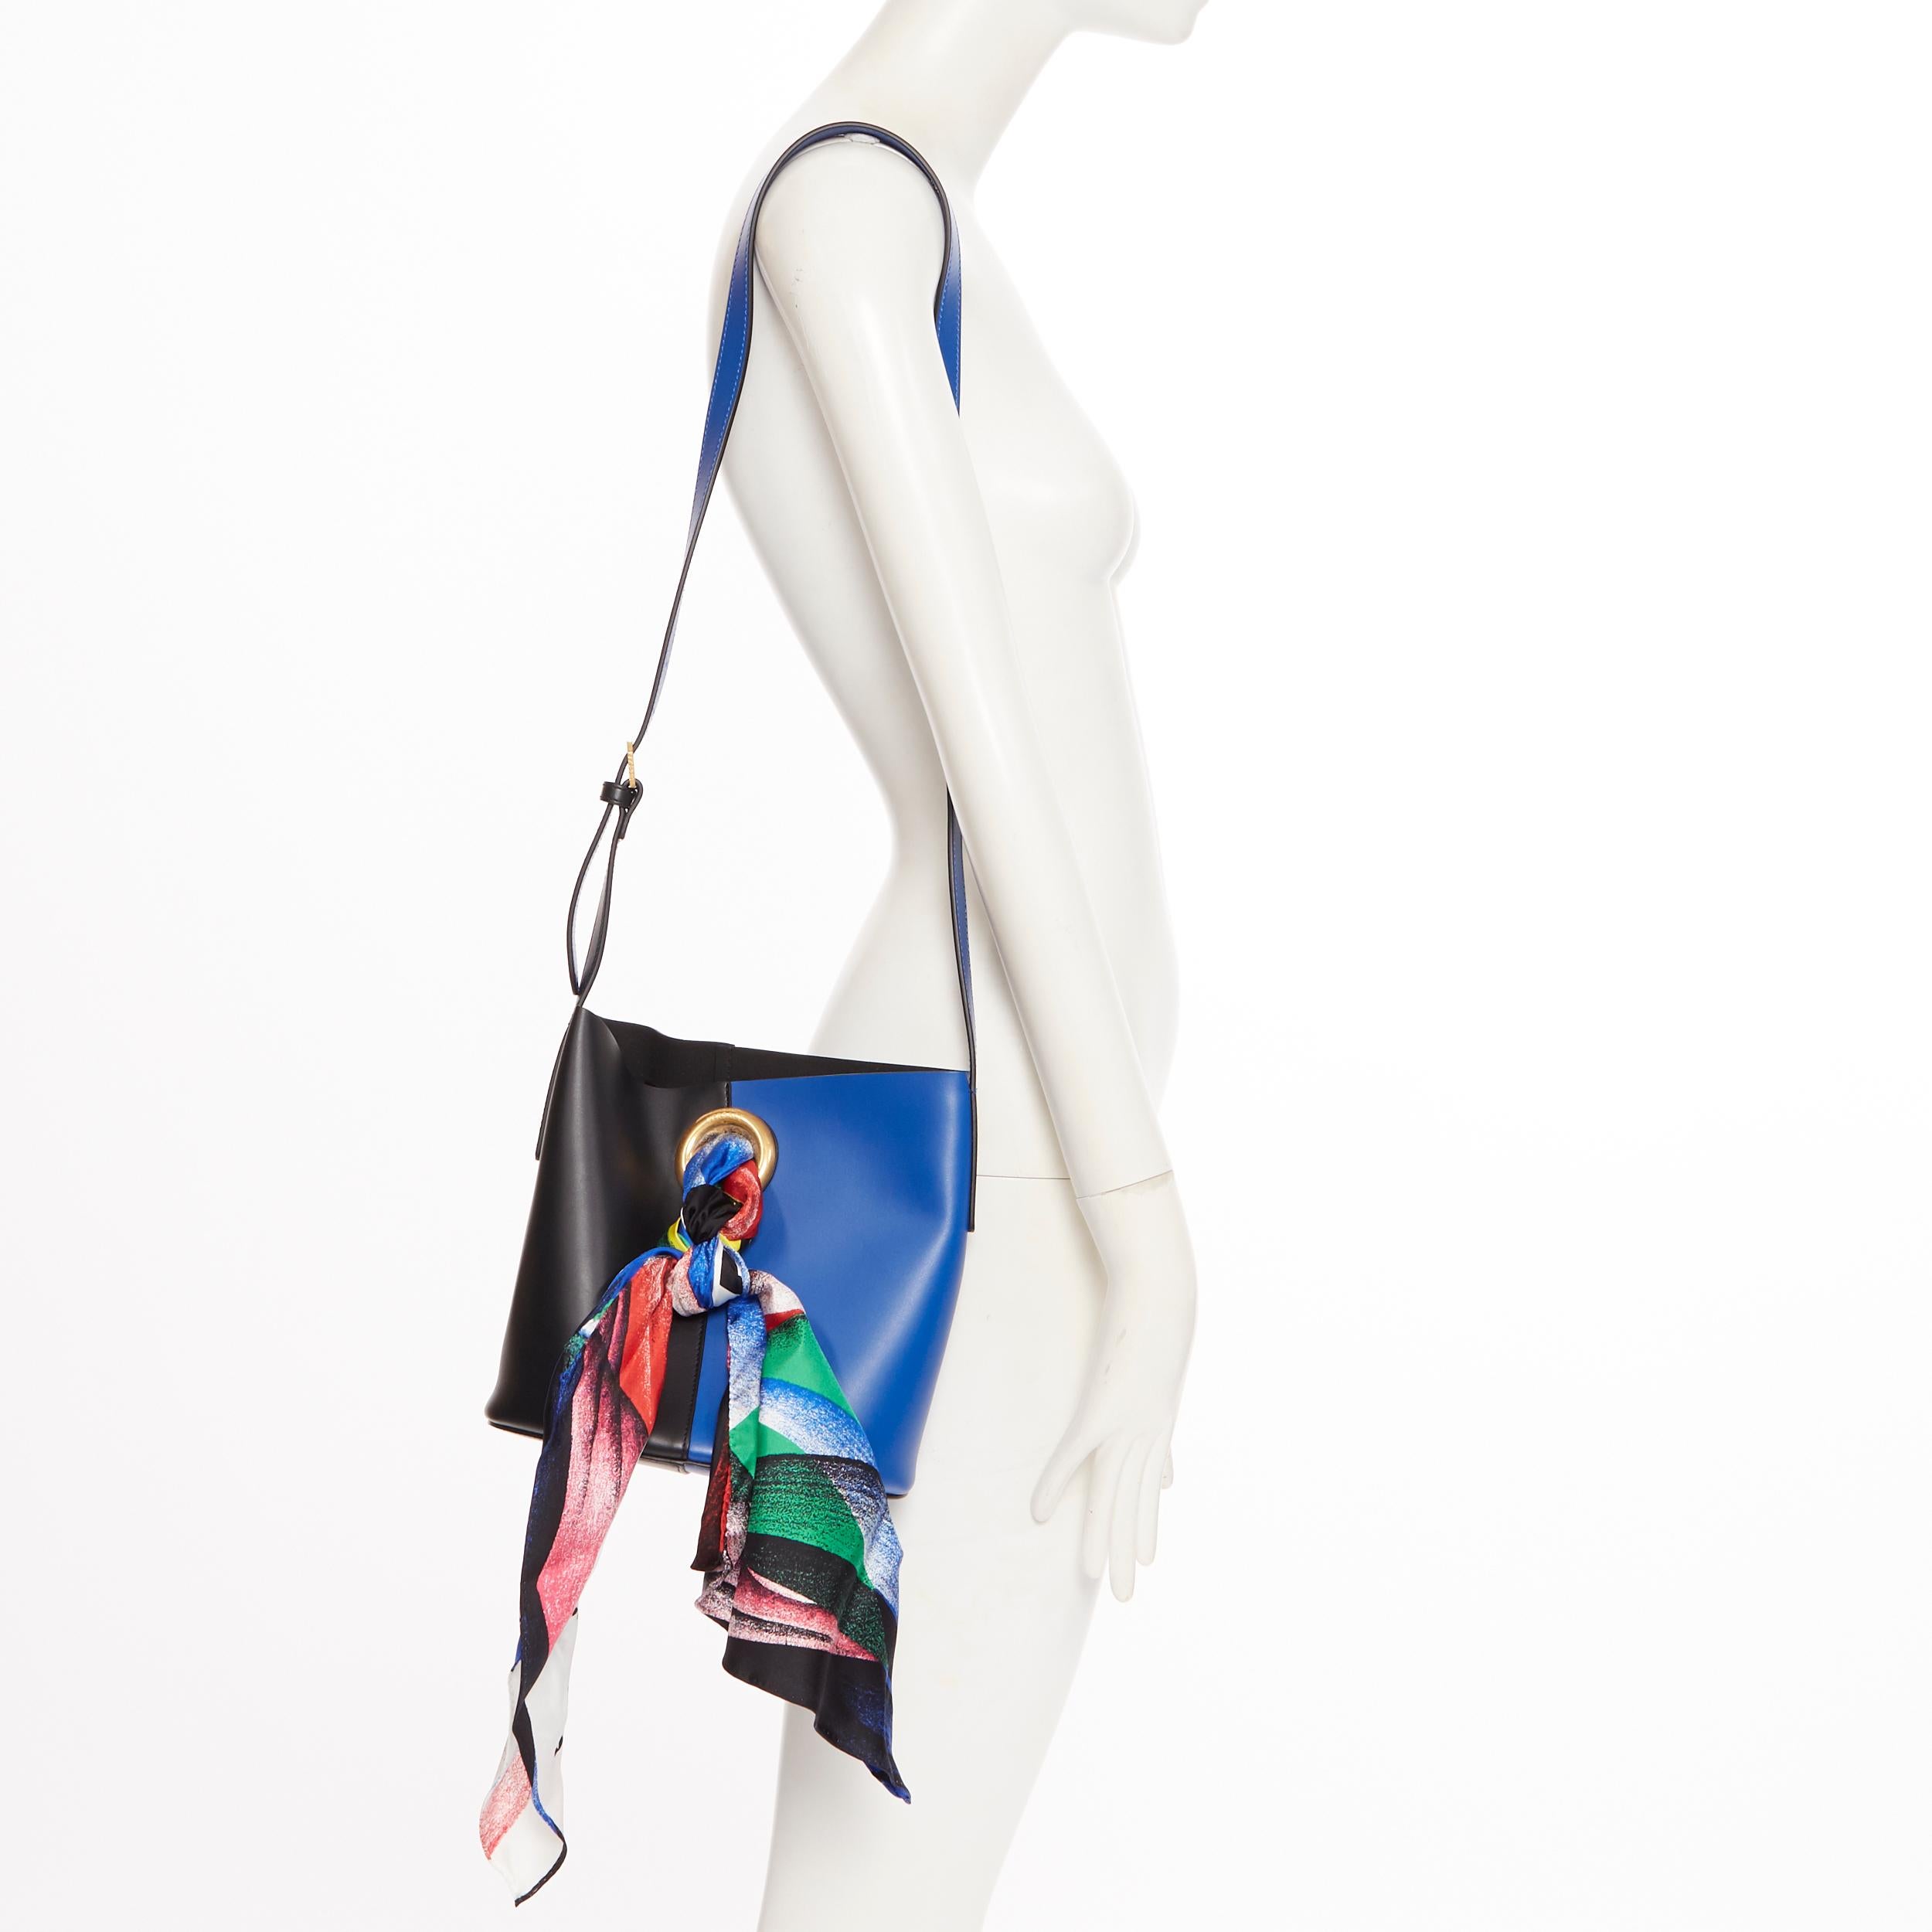 new VERSACE AW18 blue black calf leather Boccioni silk scarf tie bucket bag
Brand: Versace
Designer: Donatella Versace
Collection: Fall Winter 2018
Model Name / Style: Scarf tie bag
Material: Leather; smooth calf leather
Color: Black and